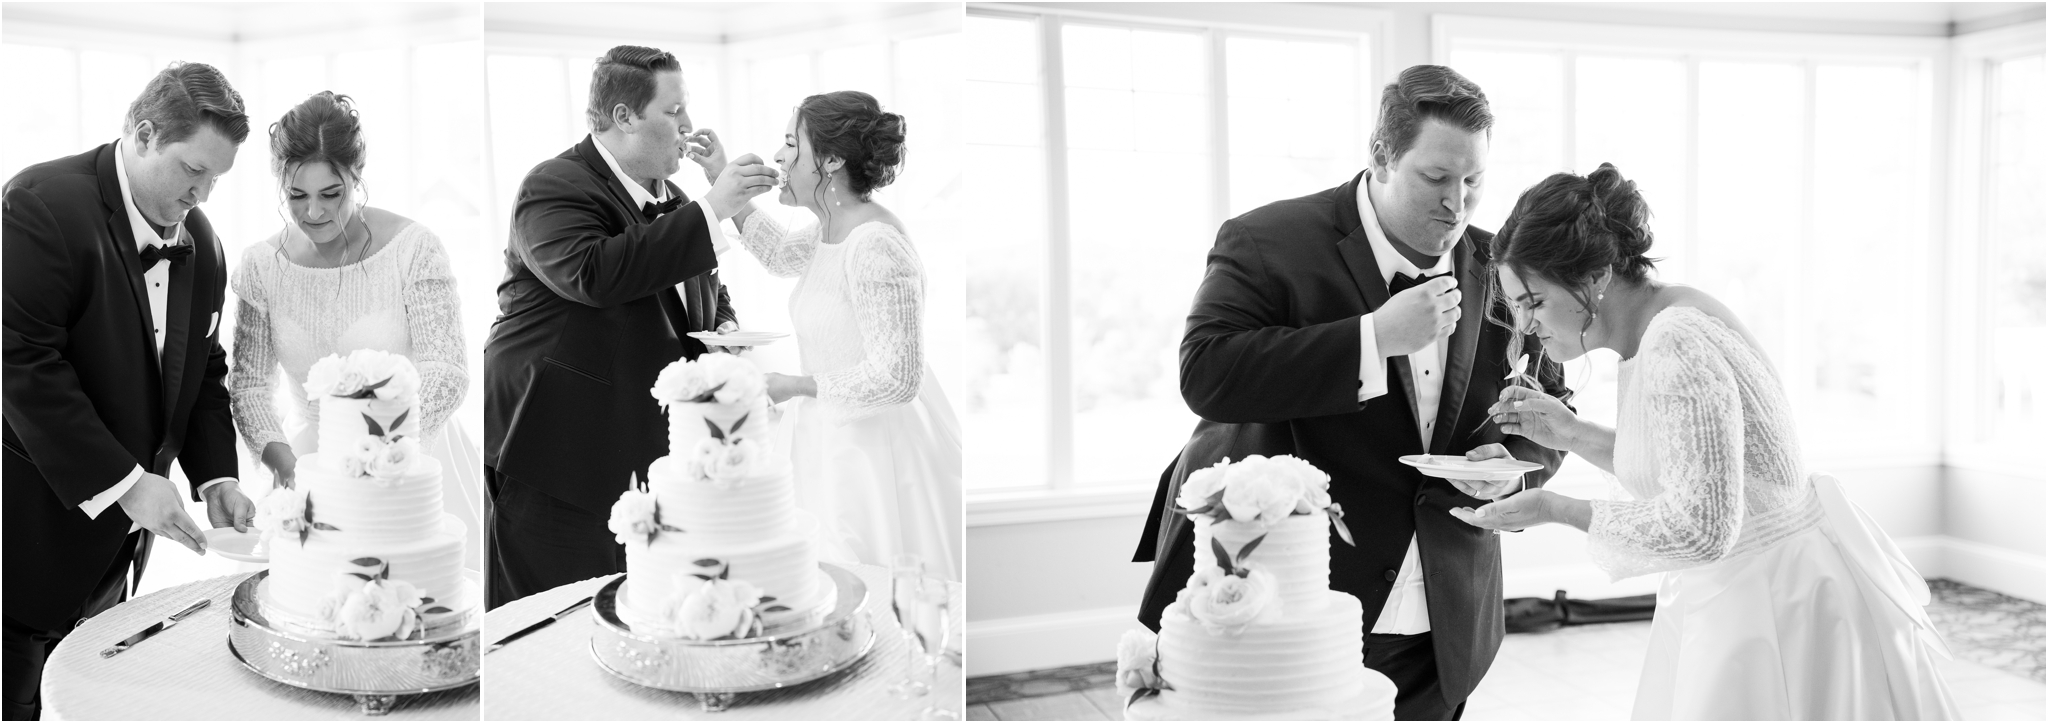 cutting the cake black and white romantic photos